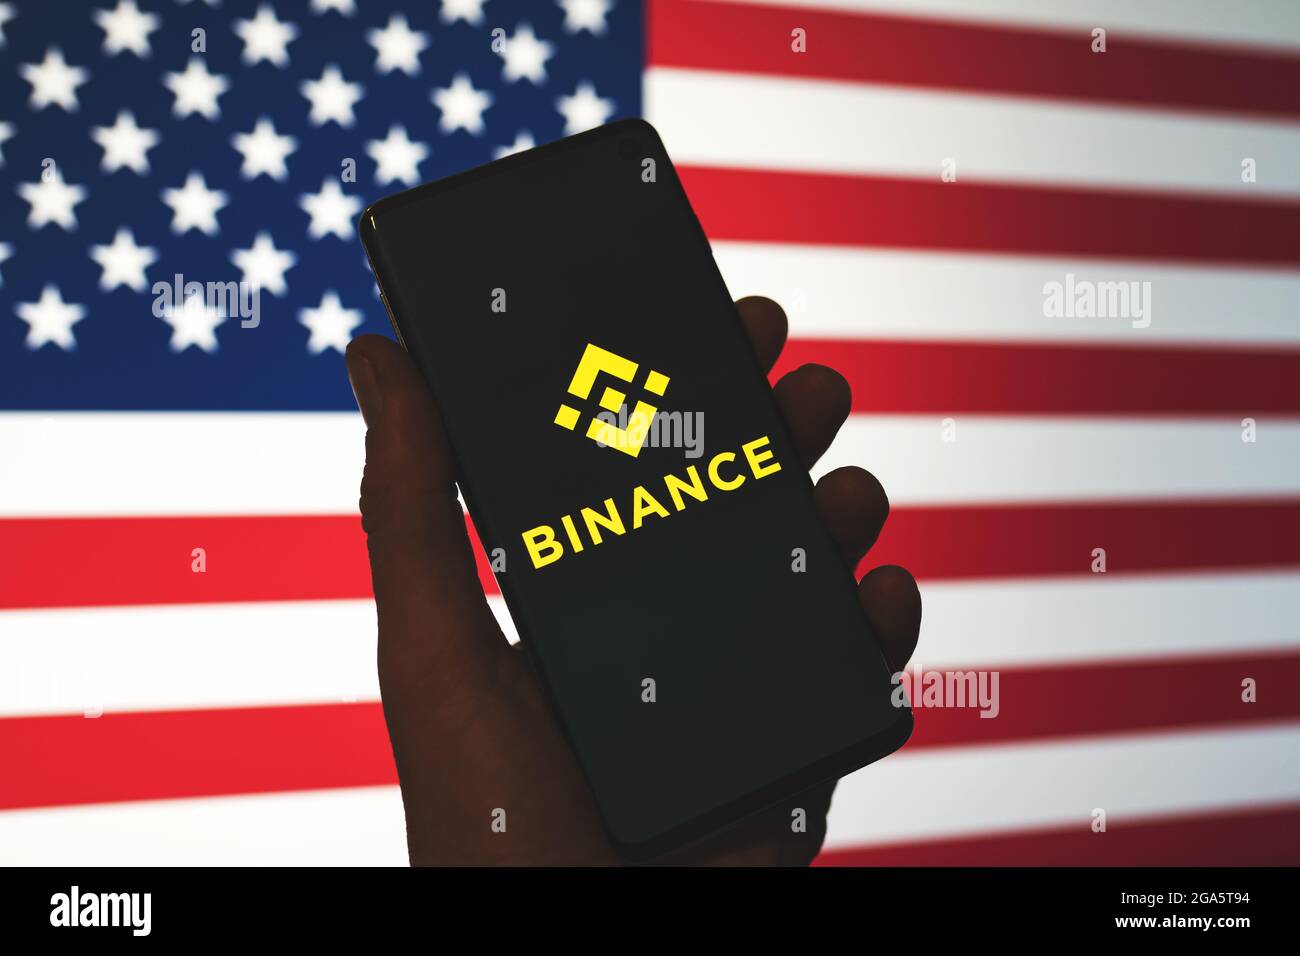 Binance app logo on smartphone in hand with blurred American flag background. Binance in the USA news. Crypto exchange, trading platform. Swansea, UK - July 27, 2021. Stock Photo